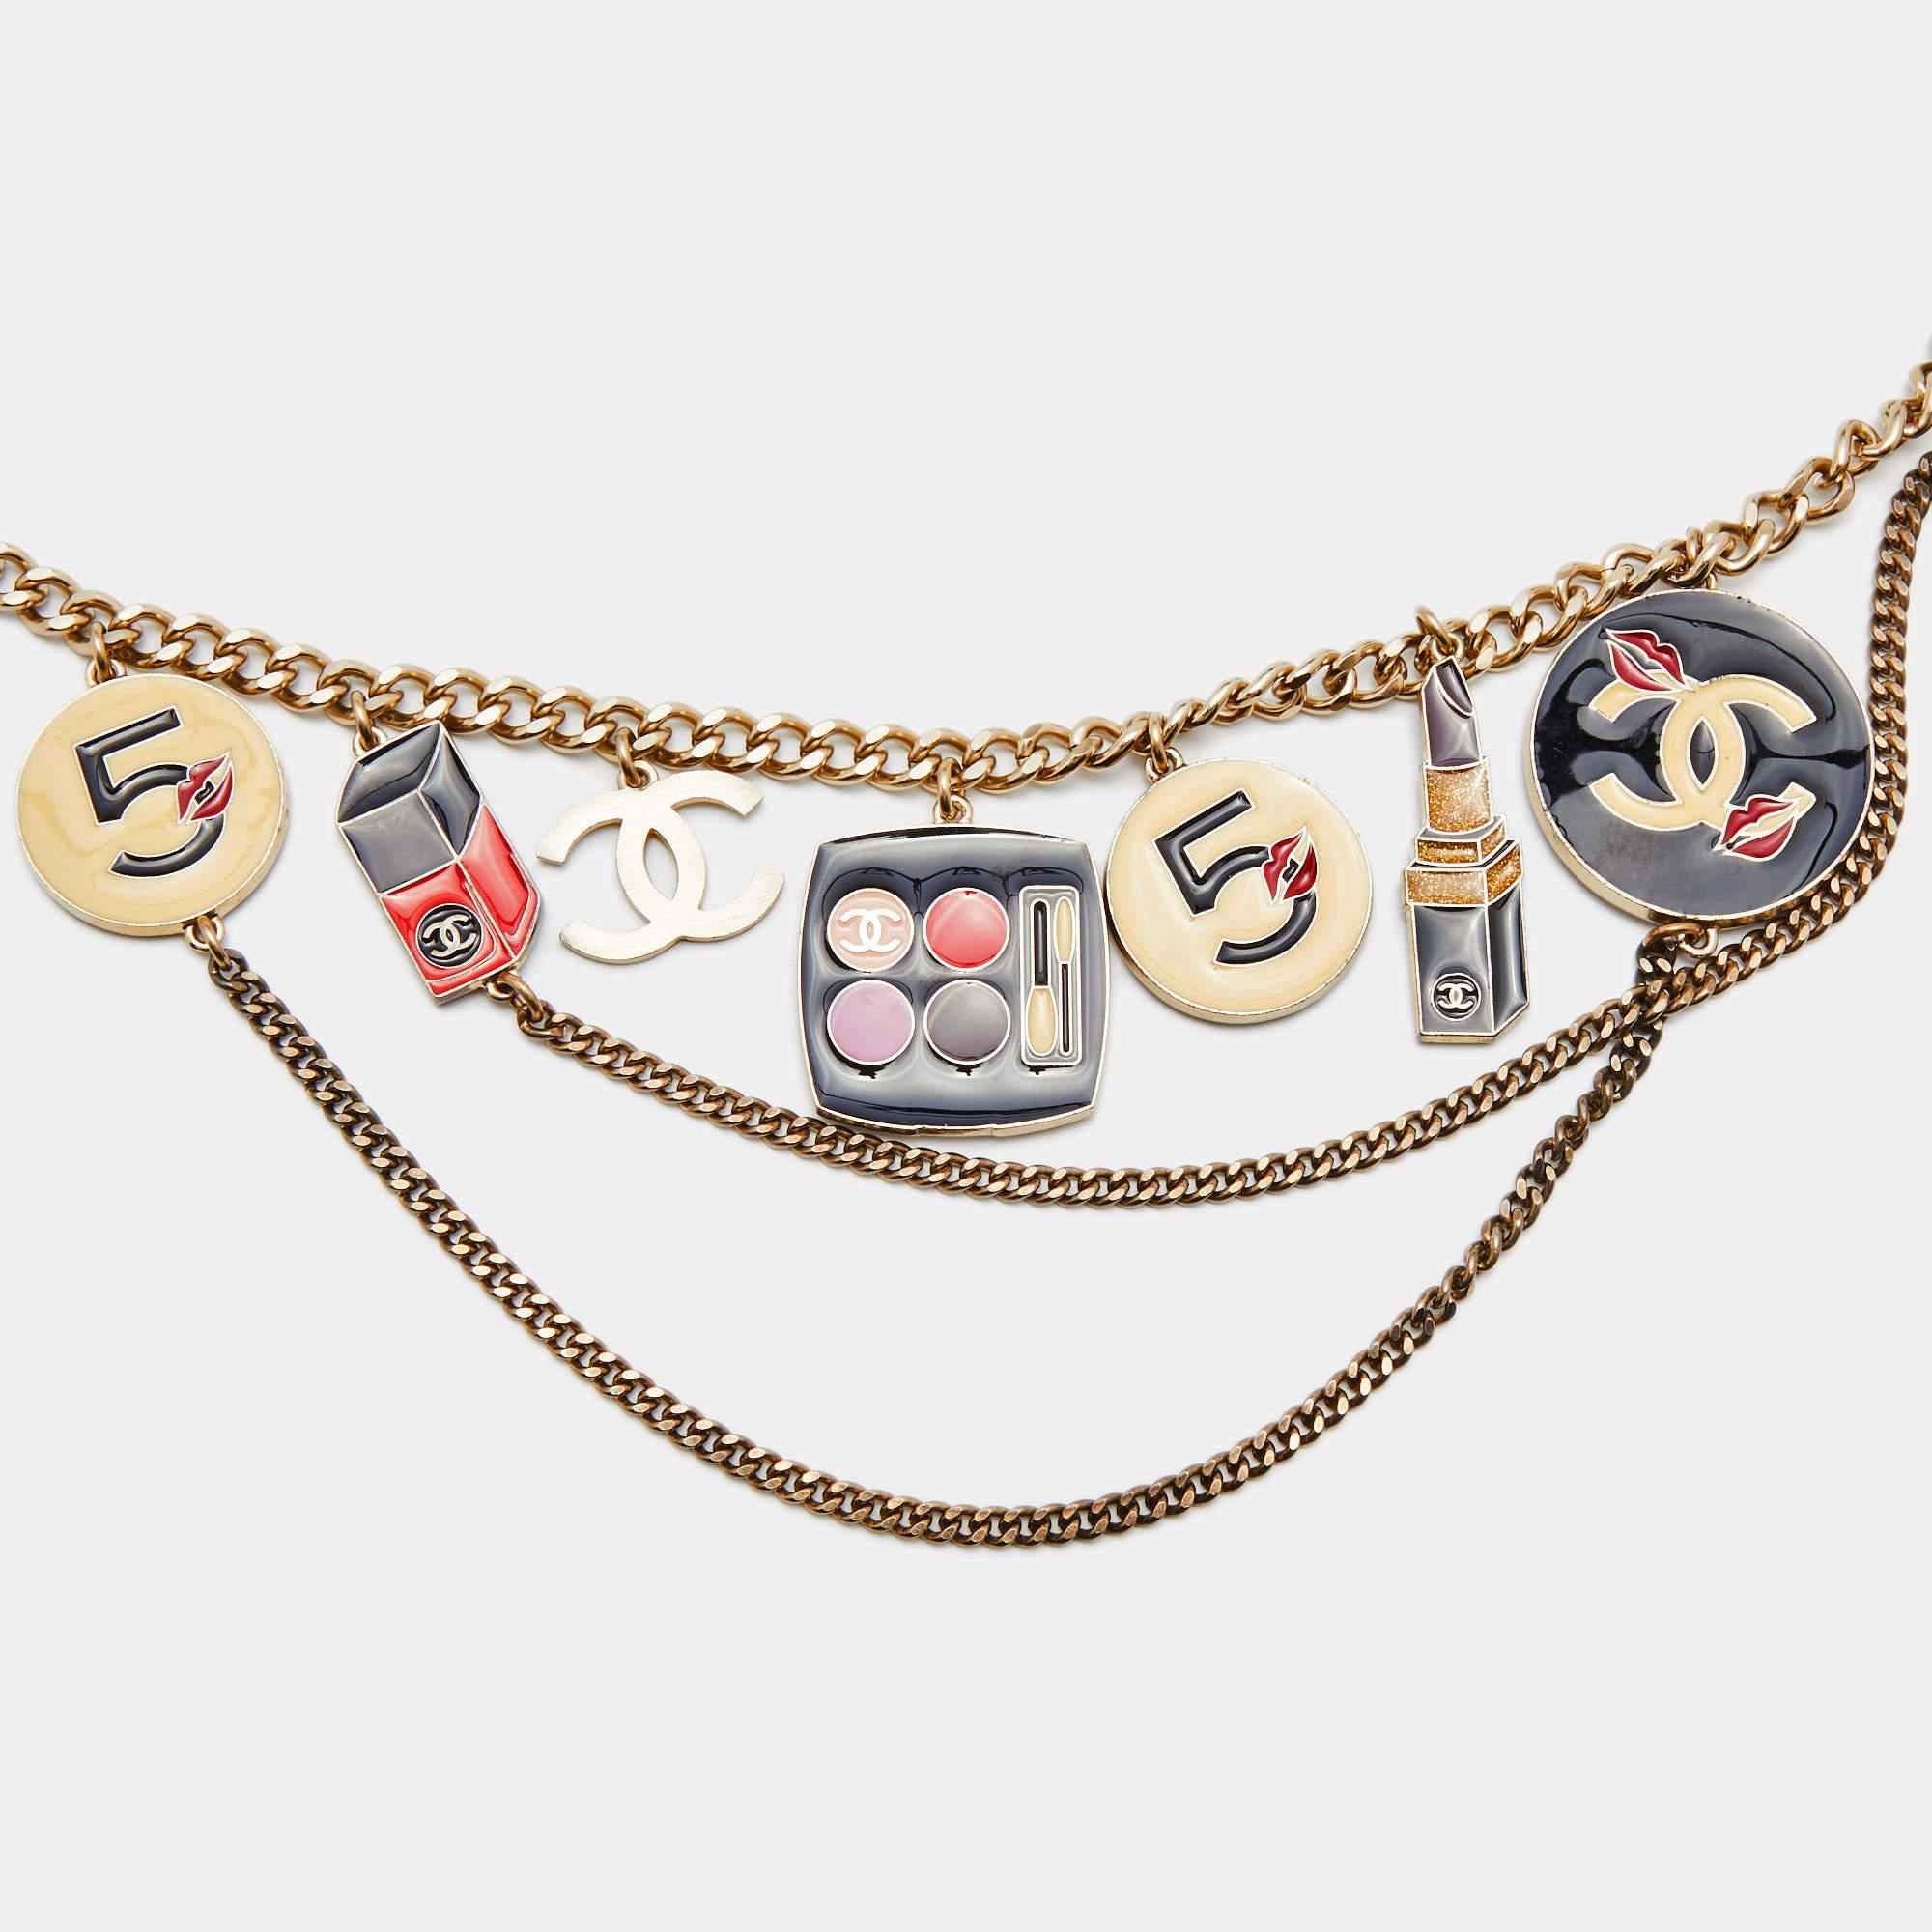 Belts are fine accessories to upgrade any basic look to a statement-making one. We particularly love this offering by Chanel. Formed using the finest materials, the belt has multiple charms for a signature finish.

Includes: Original Box, Info